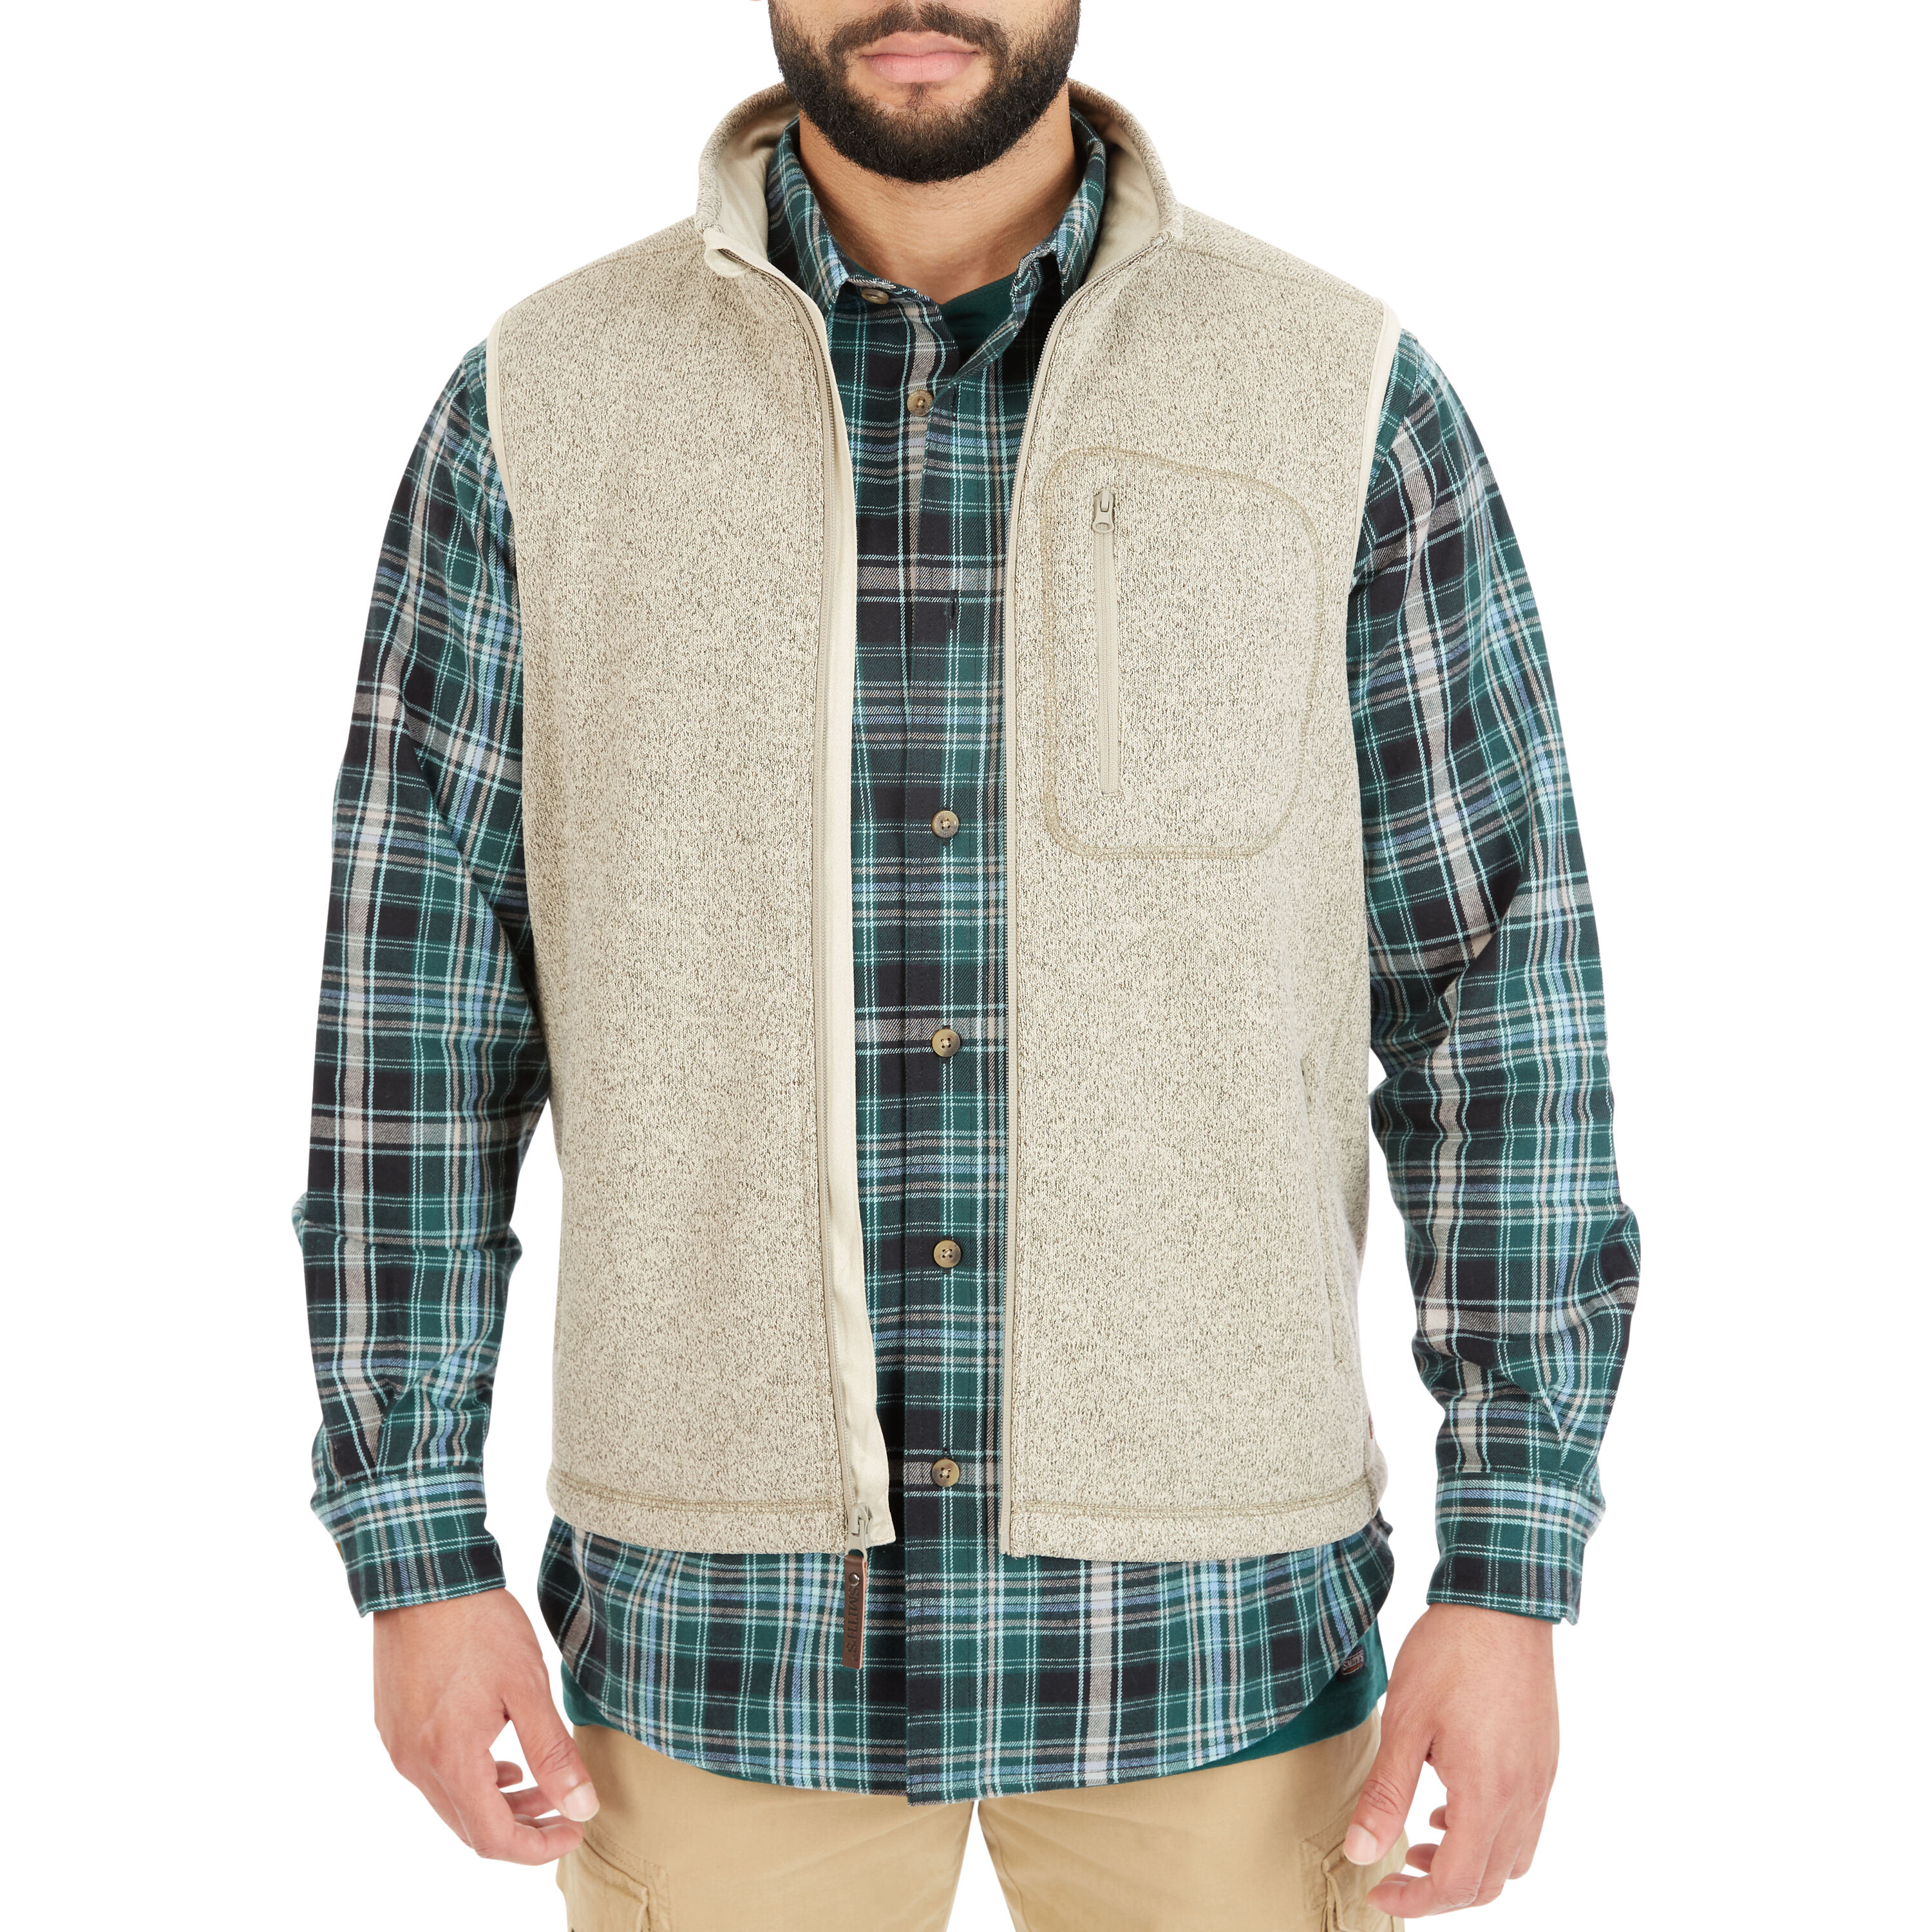 Smith's Workwear Men's Oatmeal Heather Polyester Insulated Vest 